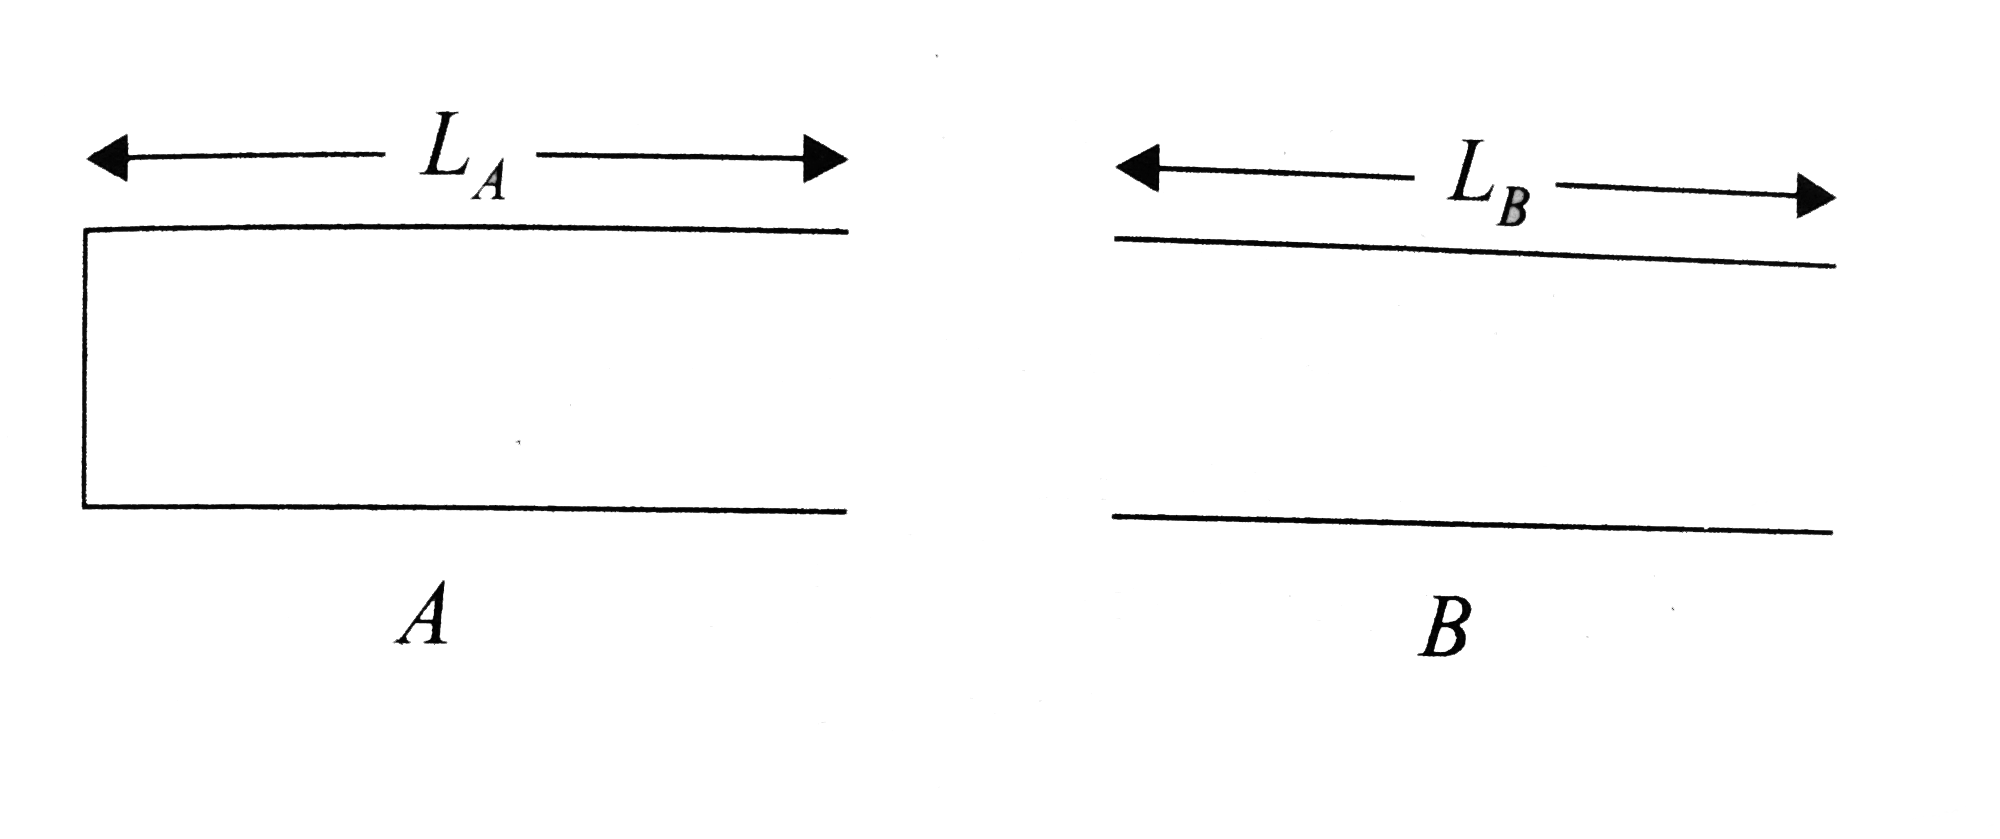 Two pipes are submerged in sea water , arranged as shown in figure . Pipe (A) with length L(A) = 1.5 m and one open end , contains a small source that sets up the standing wave with the second lowest resonant frequency of that pipe . Sound from pipe A sets up resonance in pipe B , which has both ends open . The resonance is at the second lowest resonant frequency of pipe B. The length of the pipe B is :